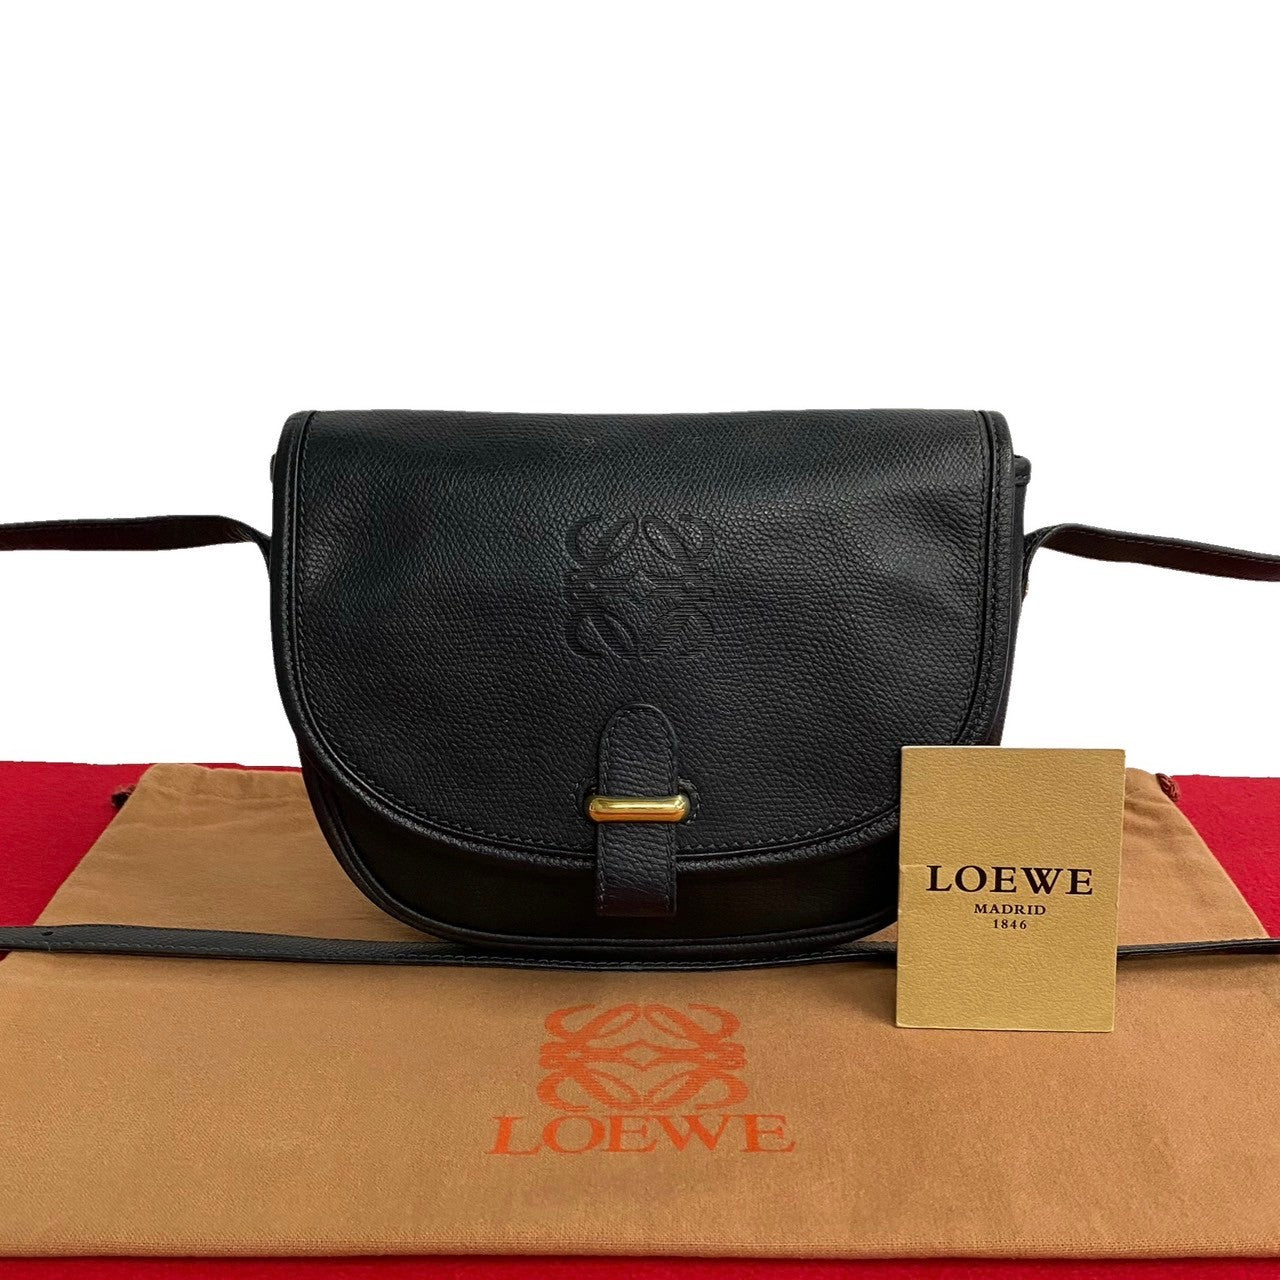 Loewe Leather Crossbody Bag Leather Crossbody Bag in Good condition